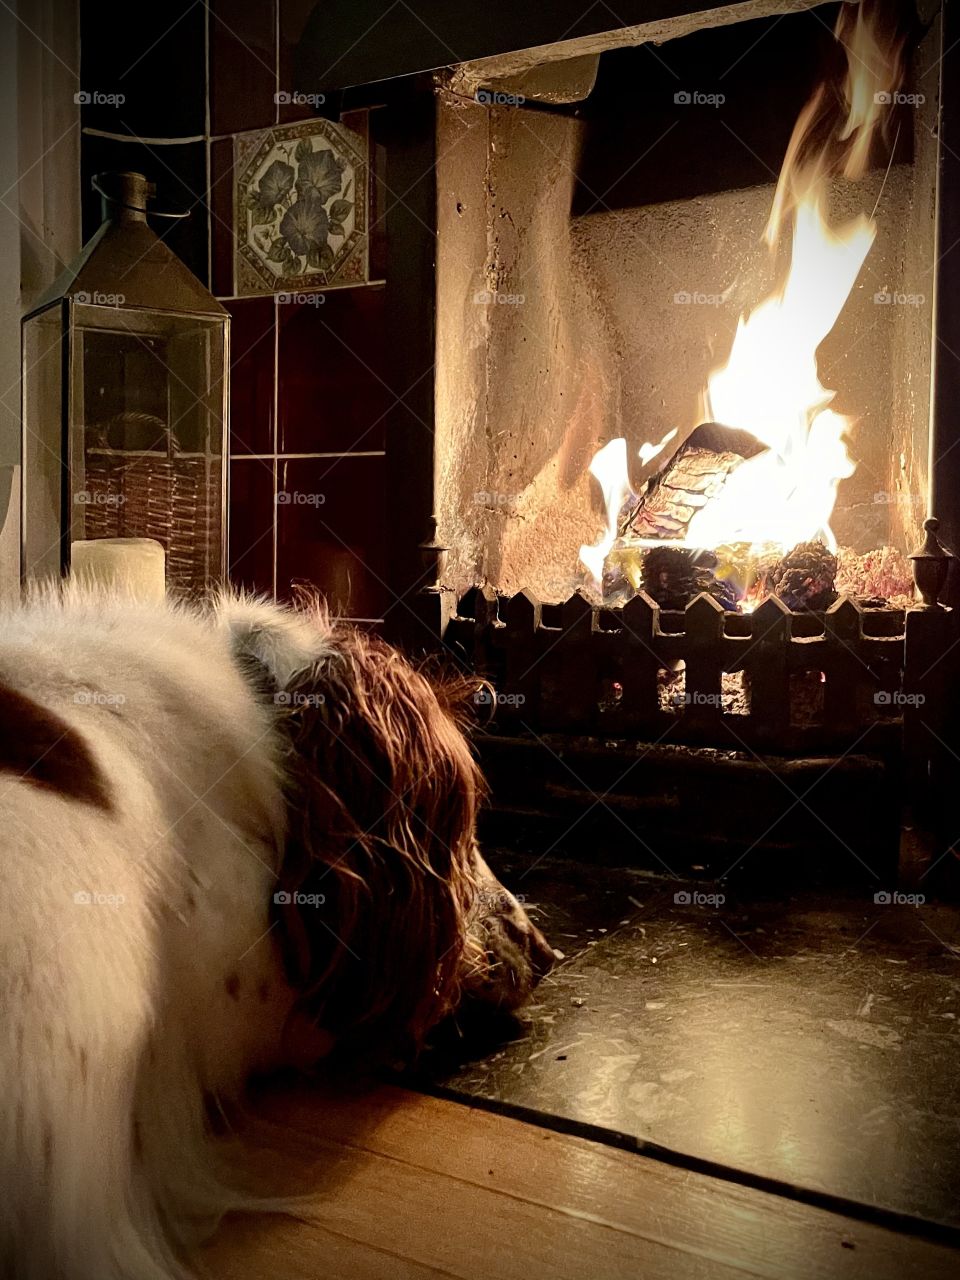 Asleep in front of the fire